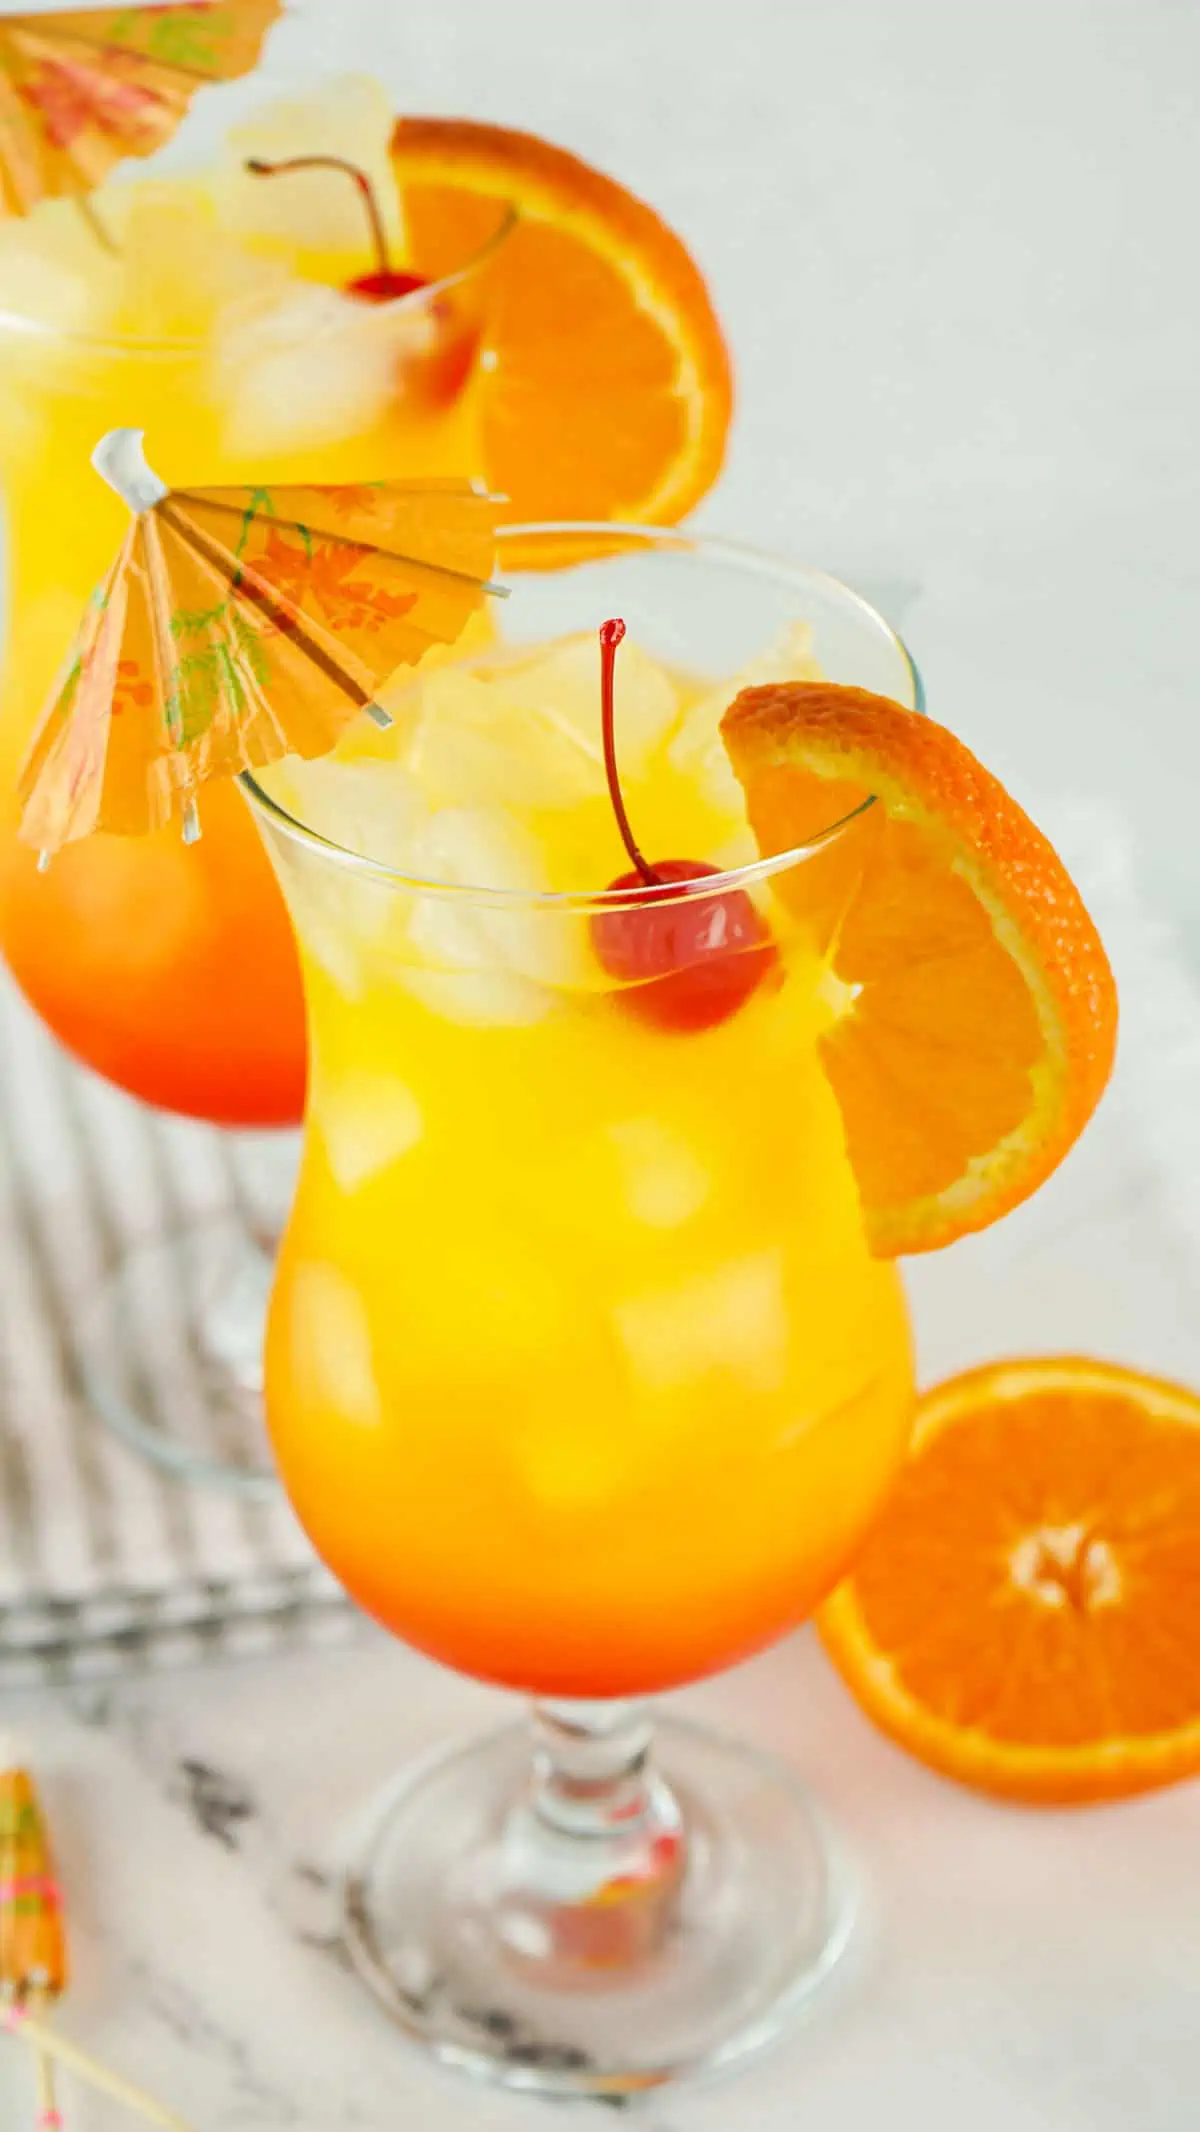 Two tropical tequila sunset drinks garnished with cherries and orange slices.